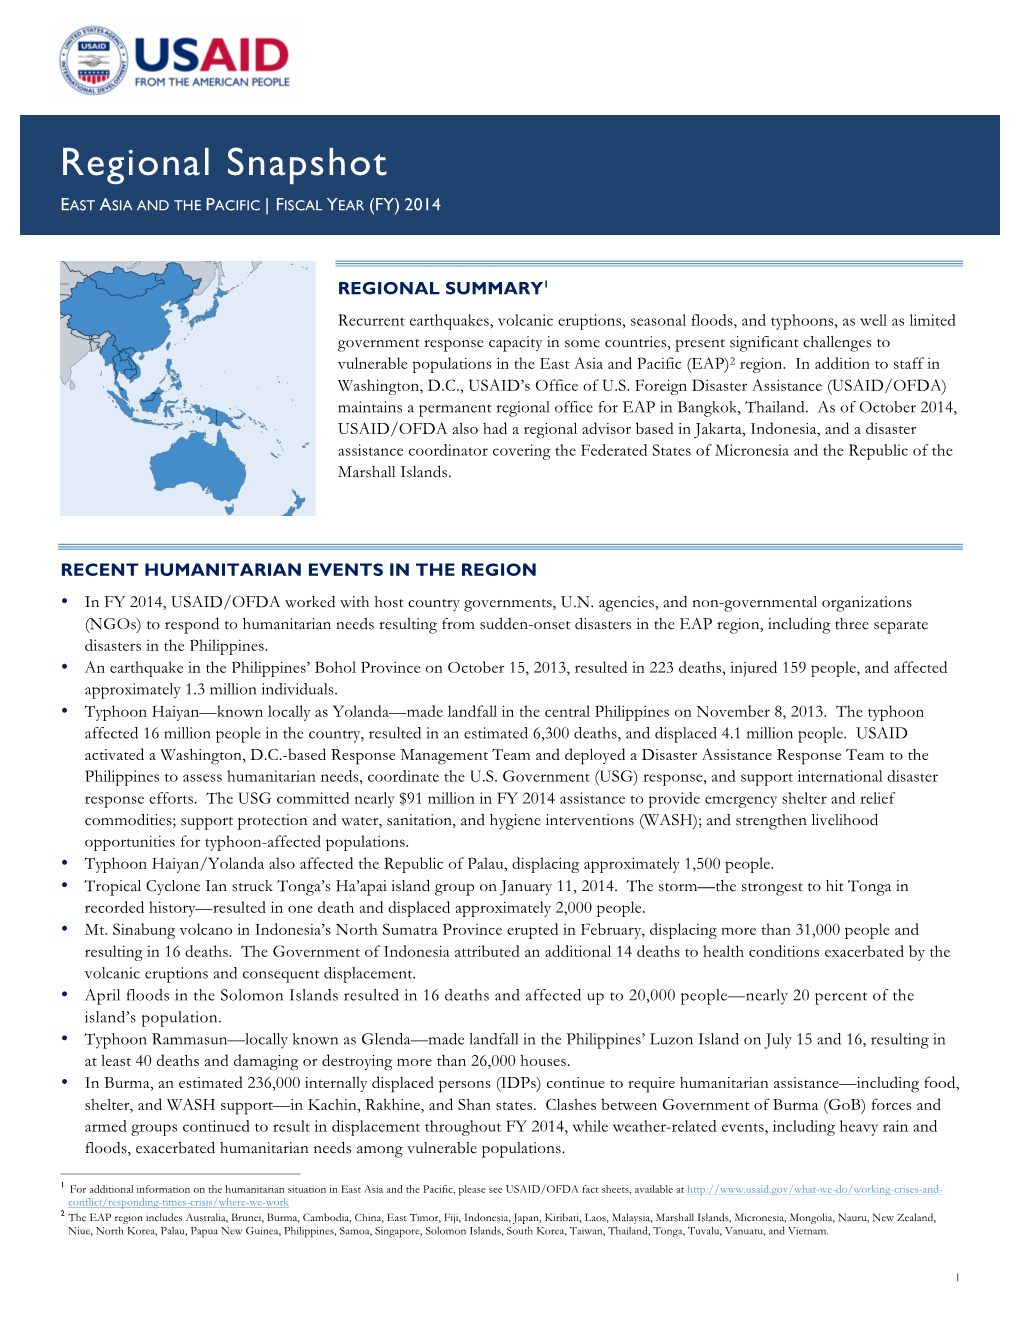 Regional Snapshot EAST ASIA and the PACIFIC | FISCAL YEAR (FY) 2014